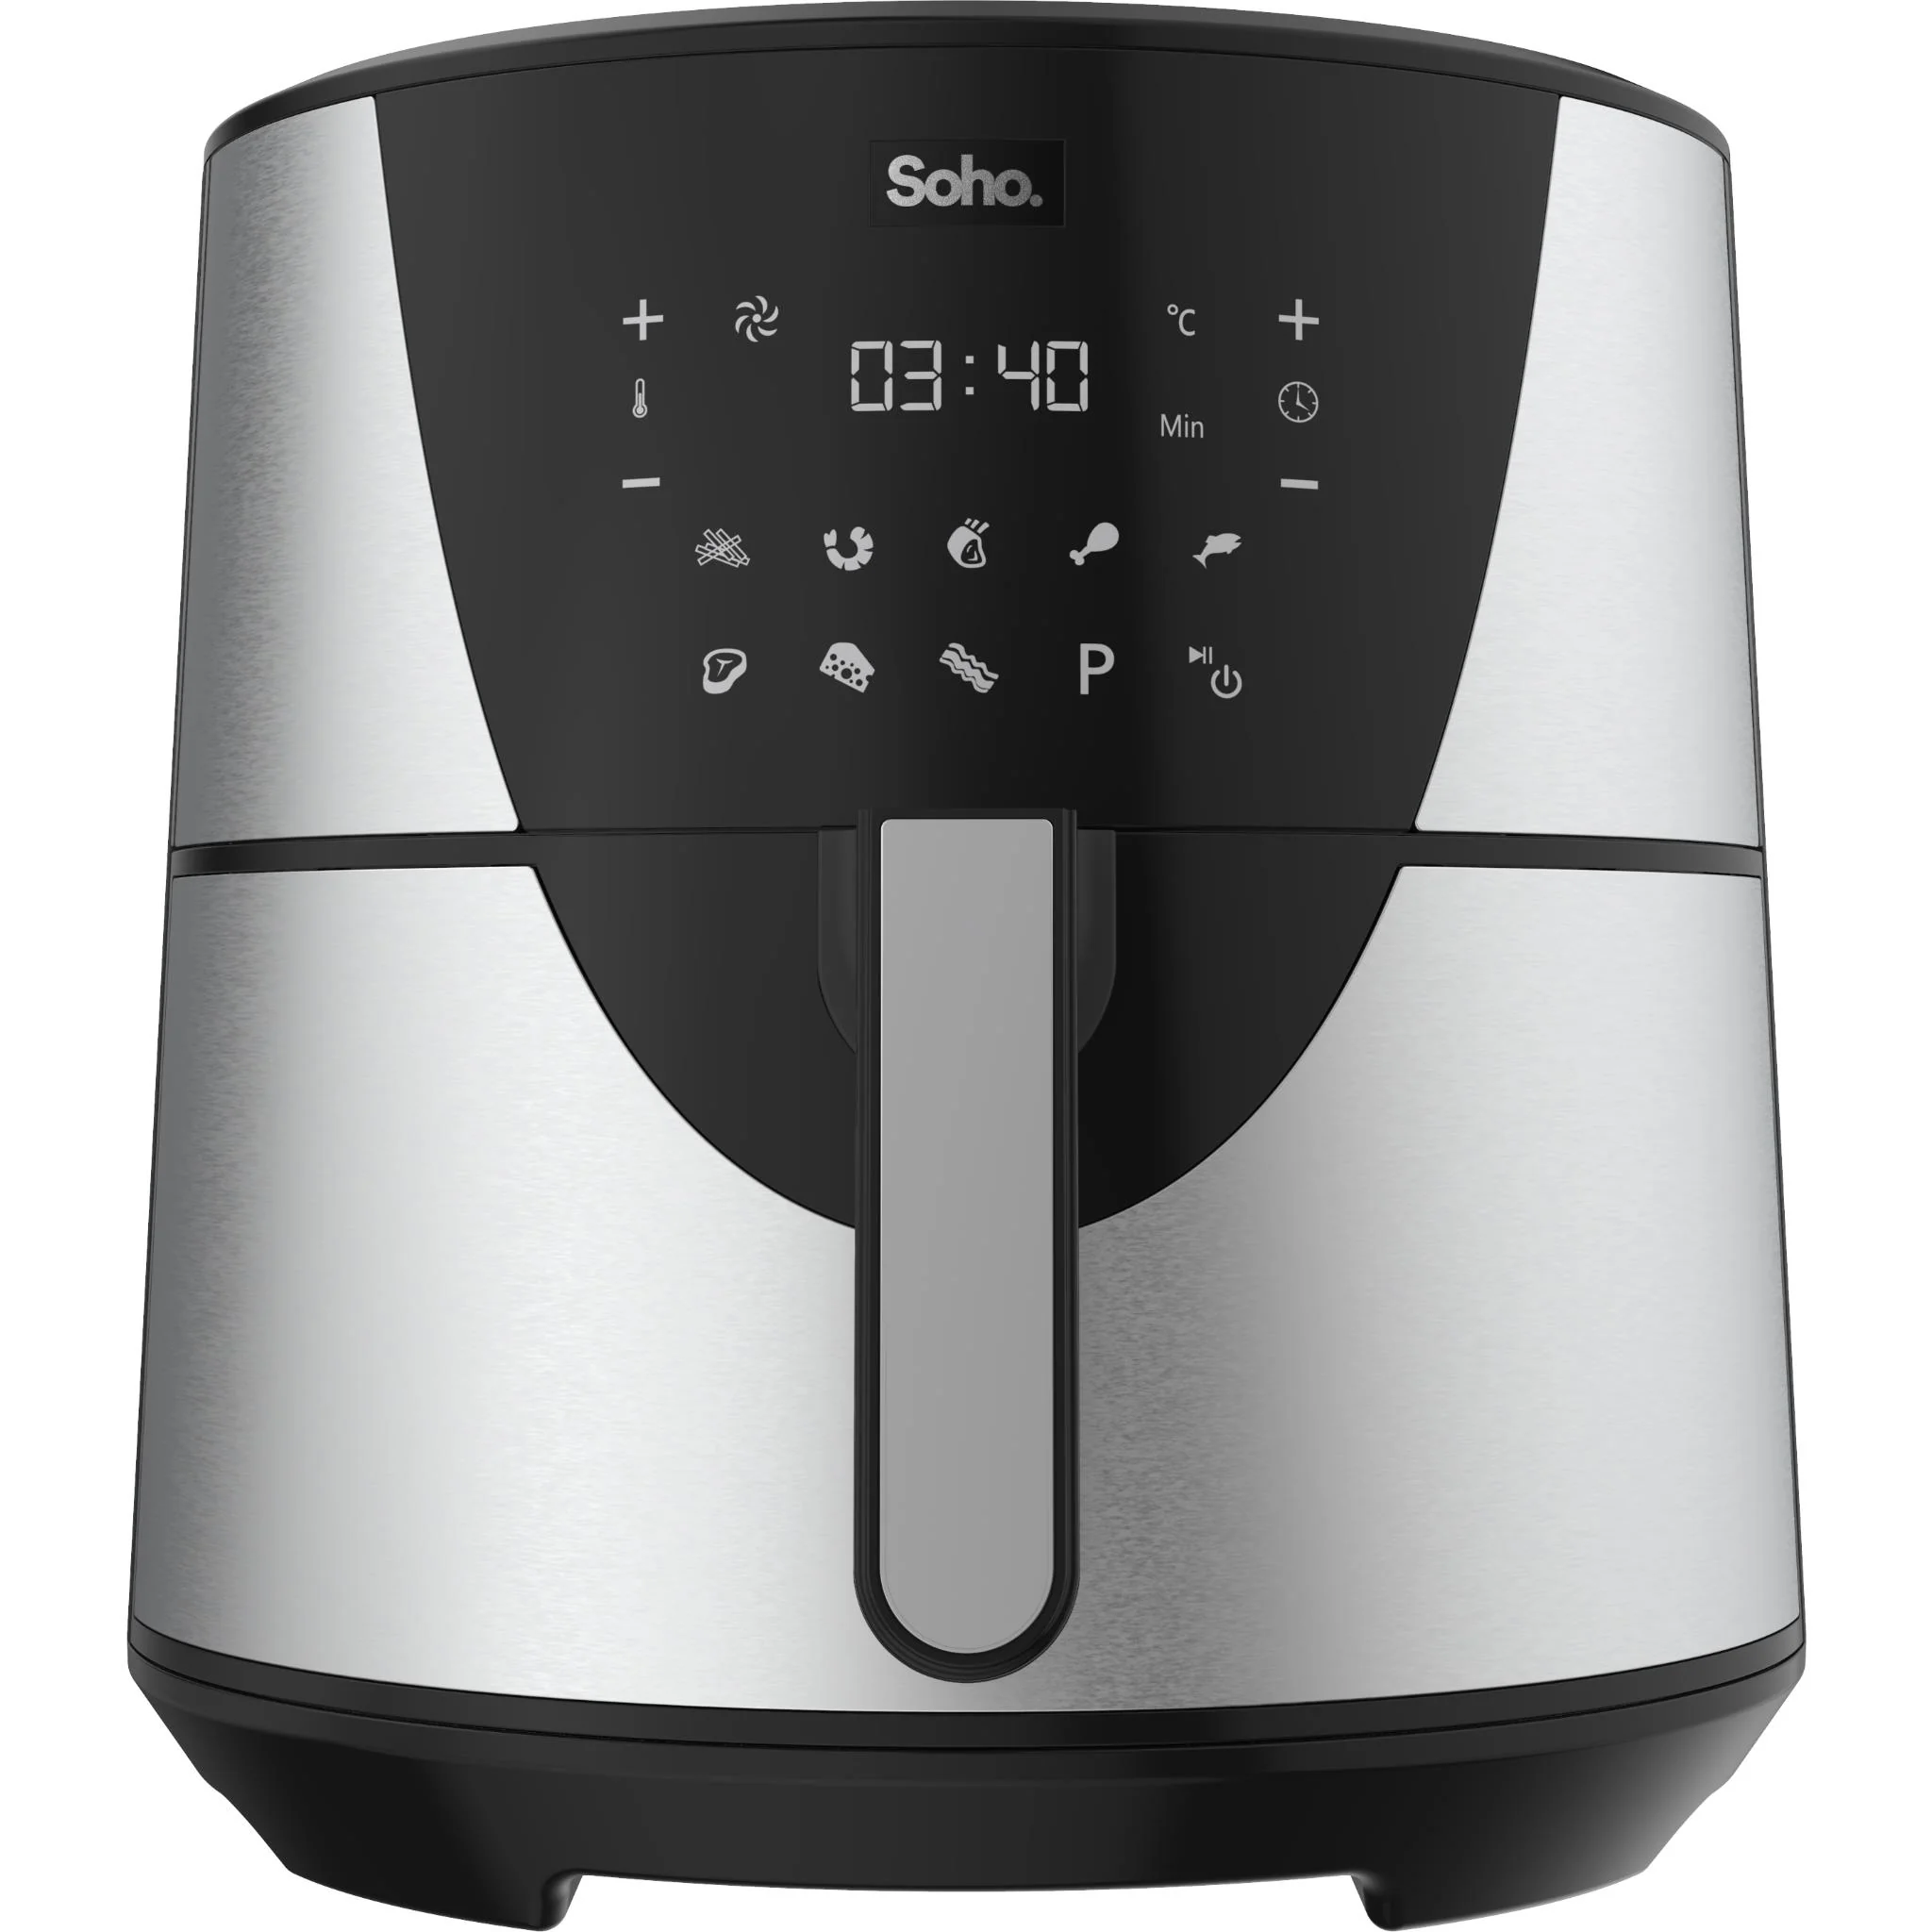 Soho FamilyChef 7.5L Air Fryer With Digital Touch Control